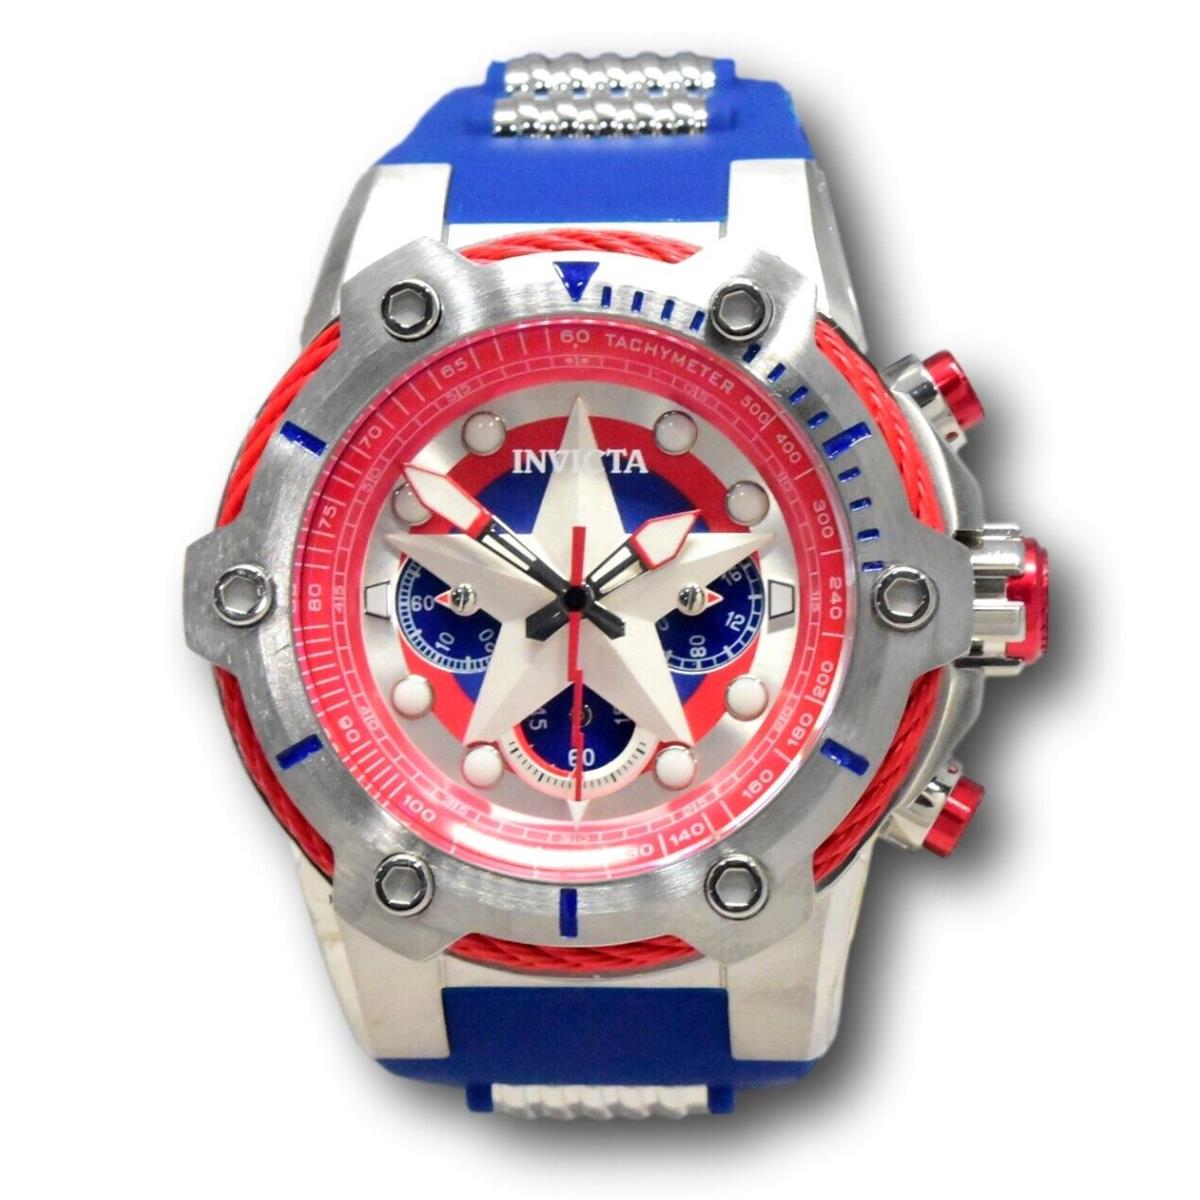 Invicta Marvel Captain America Mens 51mm Limited Bolt Chronograph Watch 26894 - Dial: Blue, Multicolor, Red, Silver, White, Band: Blue, Silver, Bezel: Red, Silver